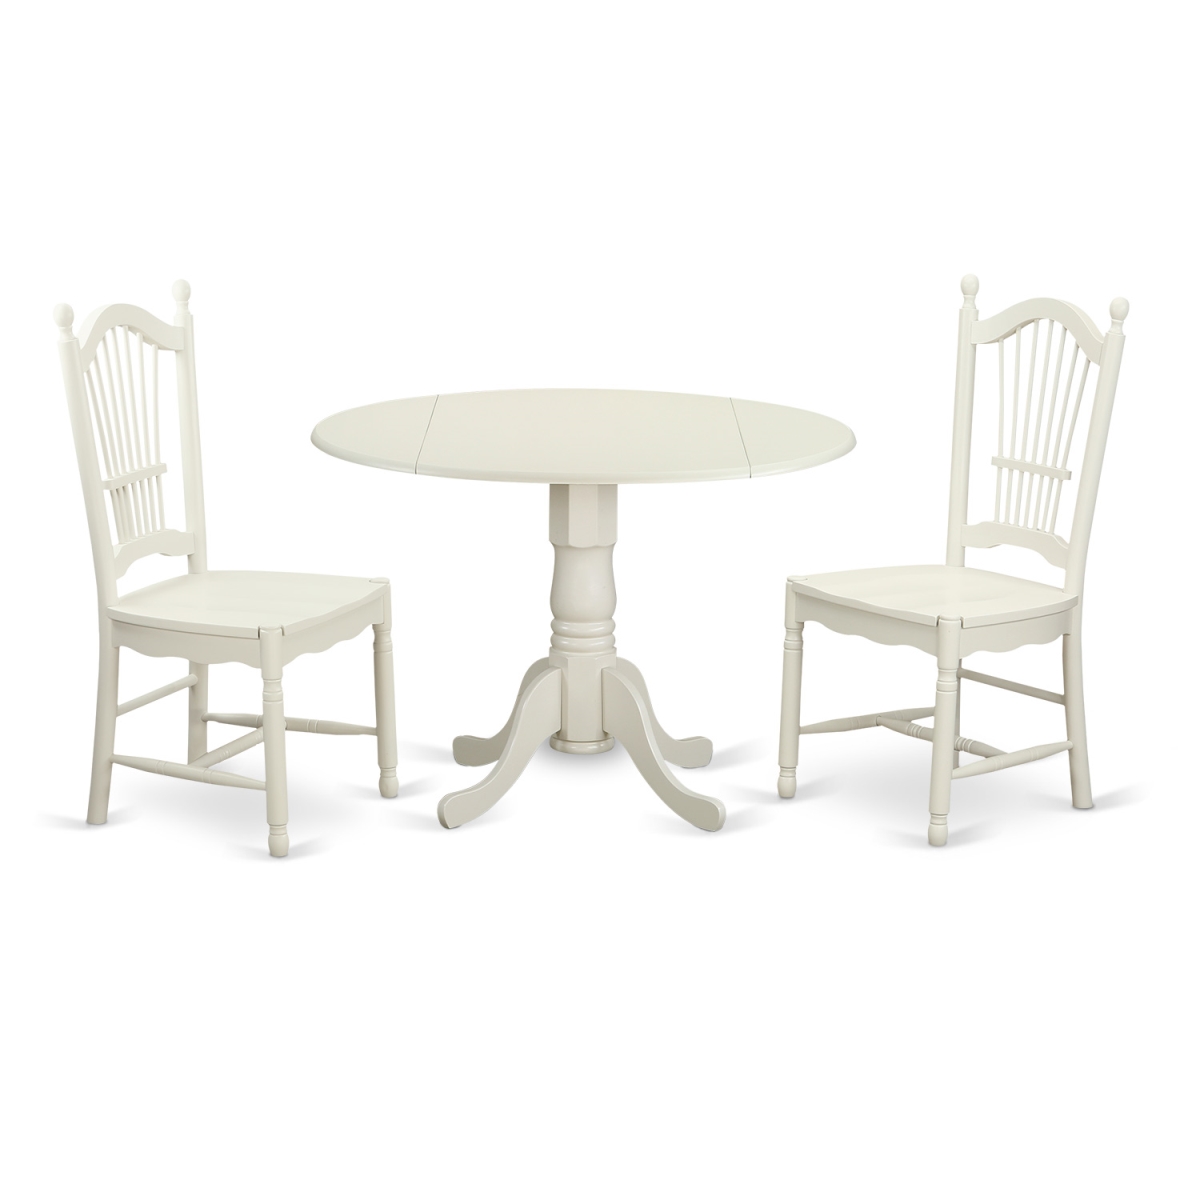 Dldo3-whi-w Kitchen Dinette Set With 2 Table & 2 Chairs, Linen White - 3 Piece